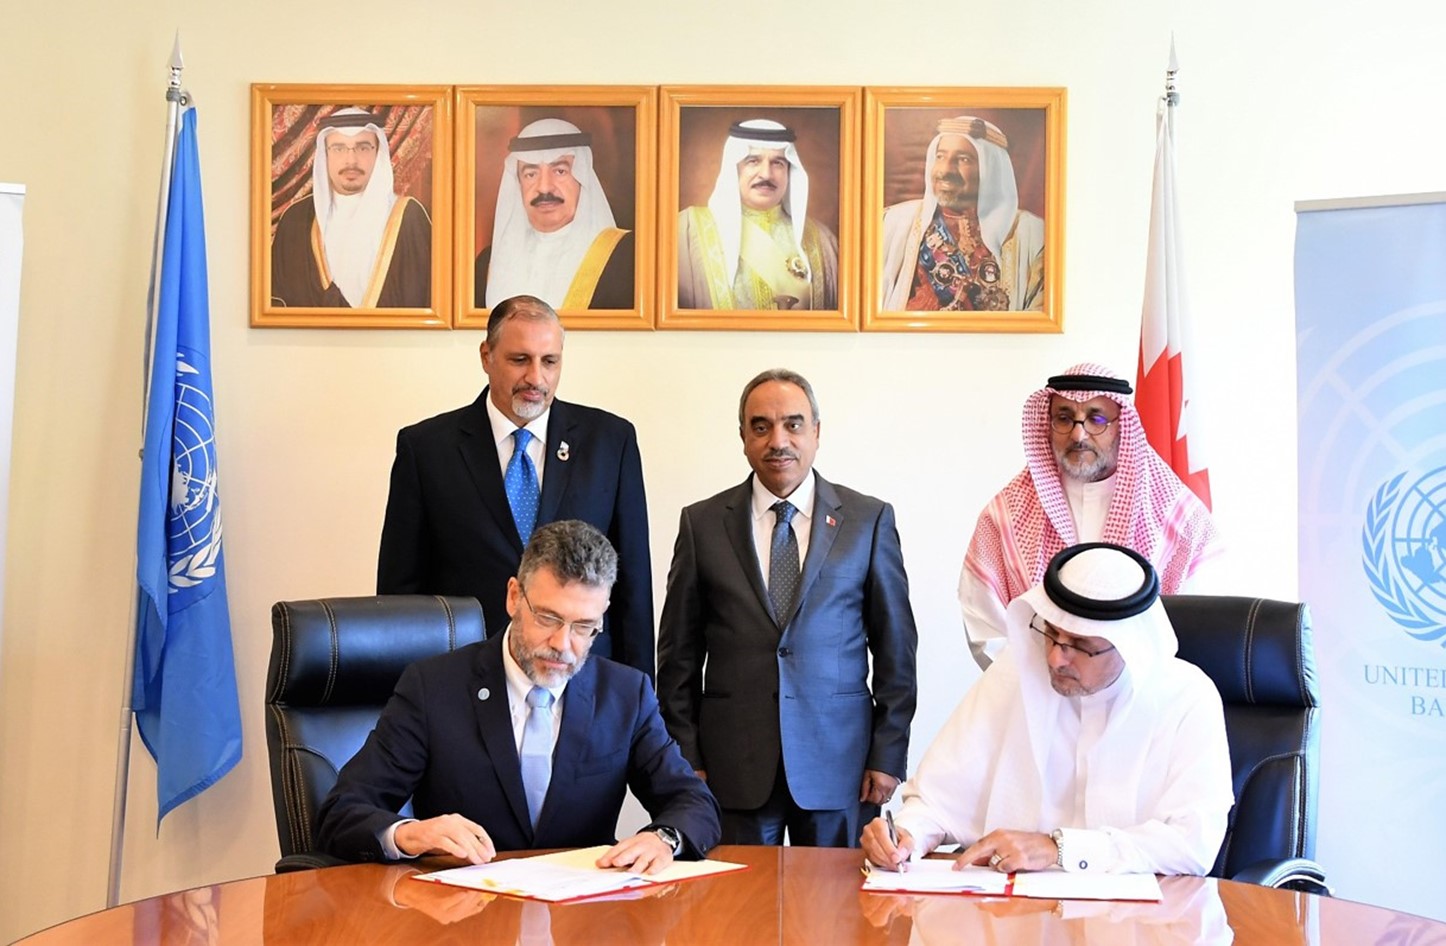 Agriculture Affairs and FAO Sign 4 Food Security Partnership Agreements